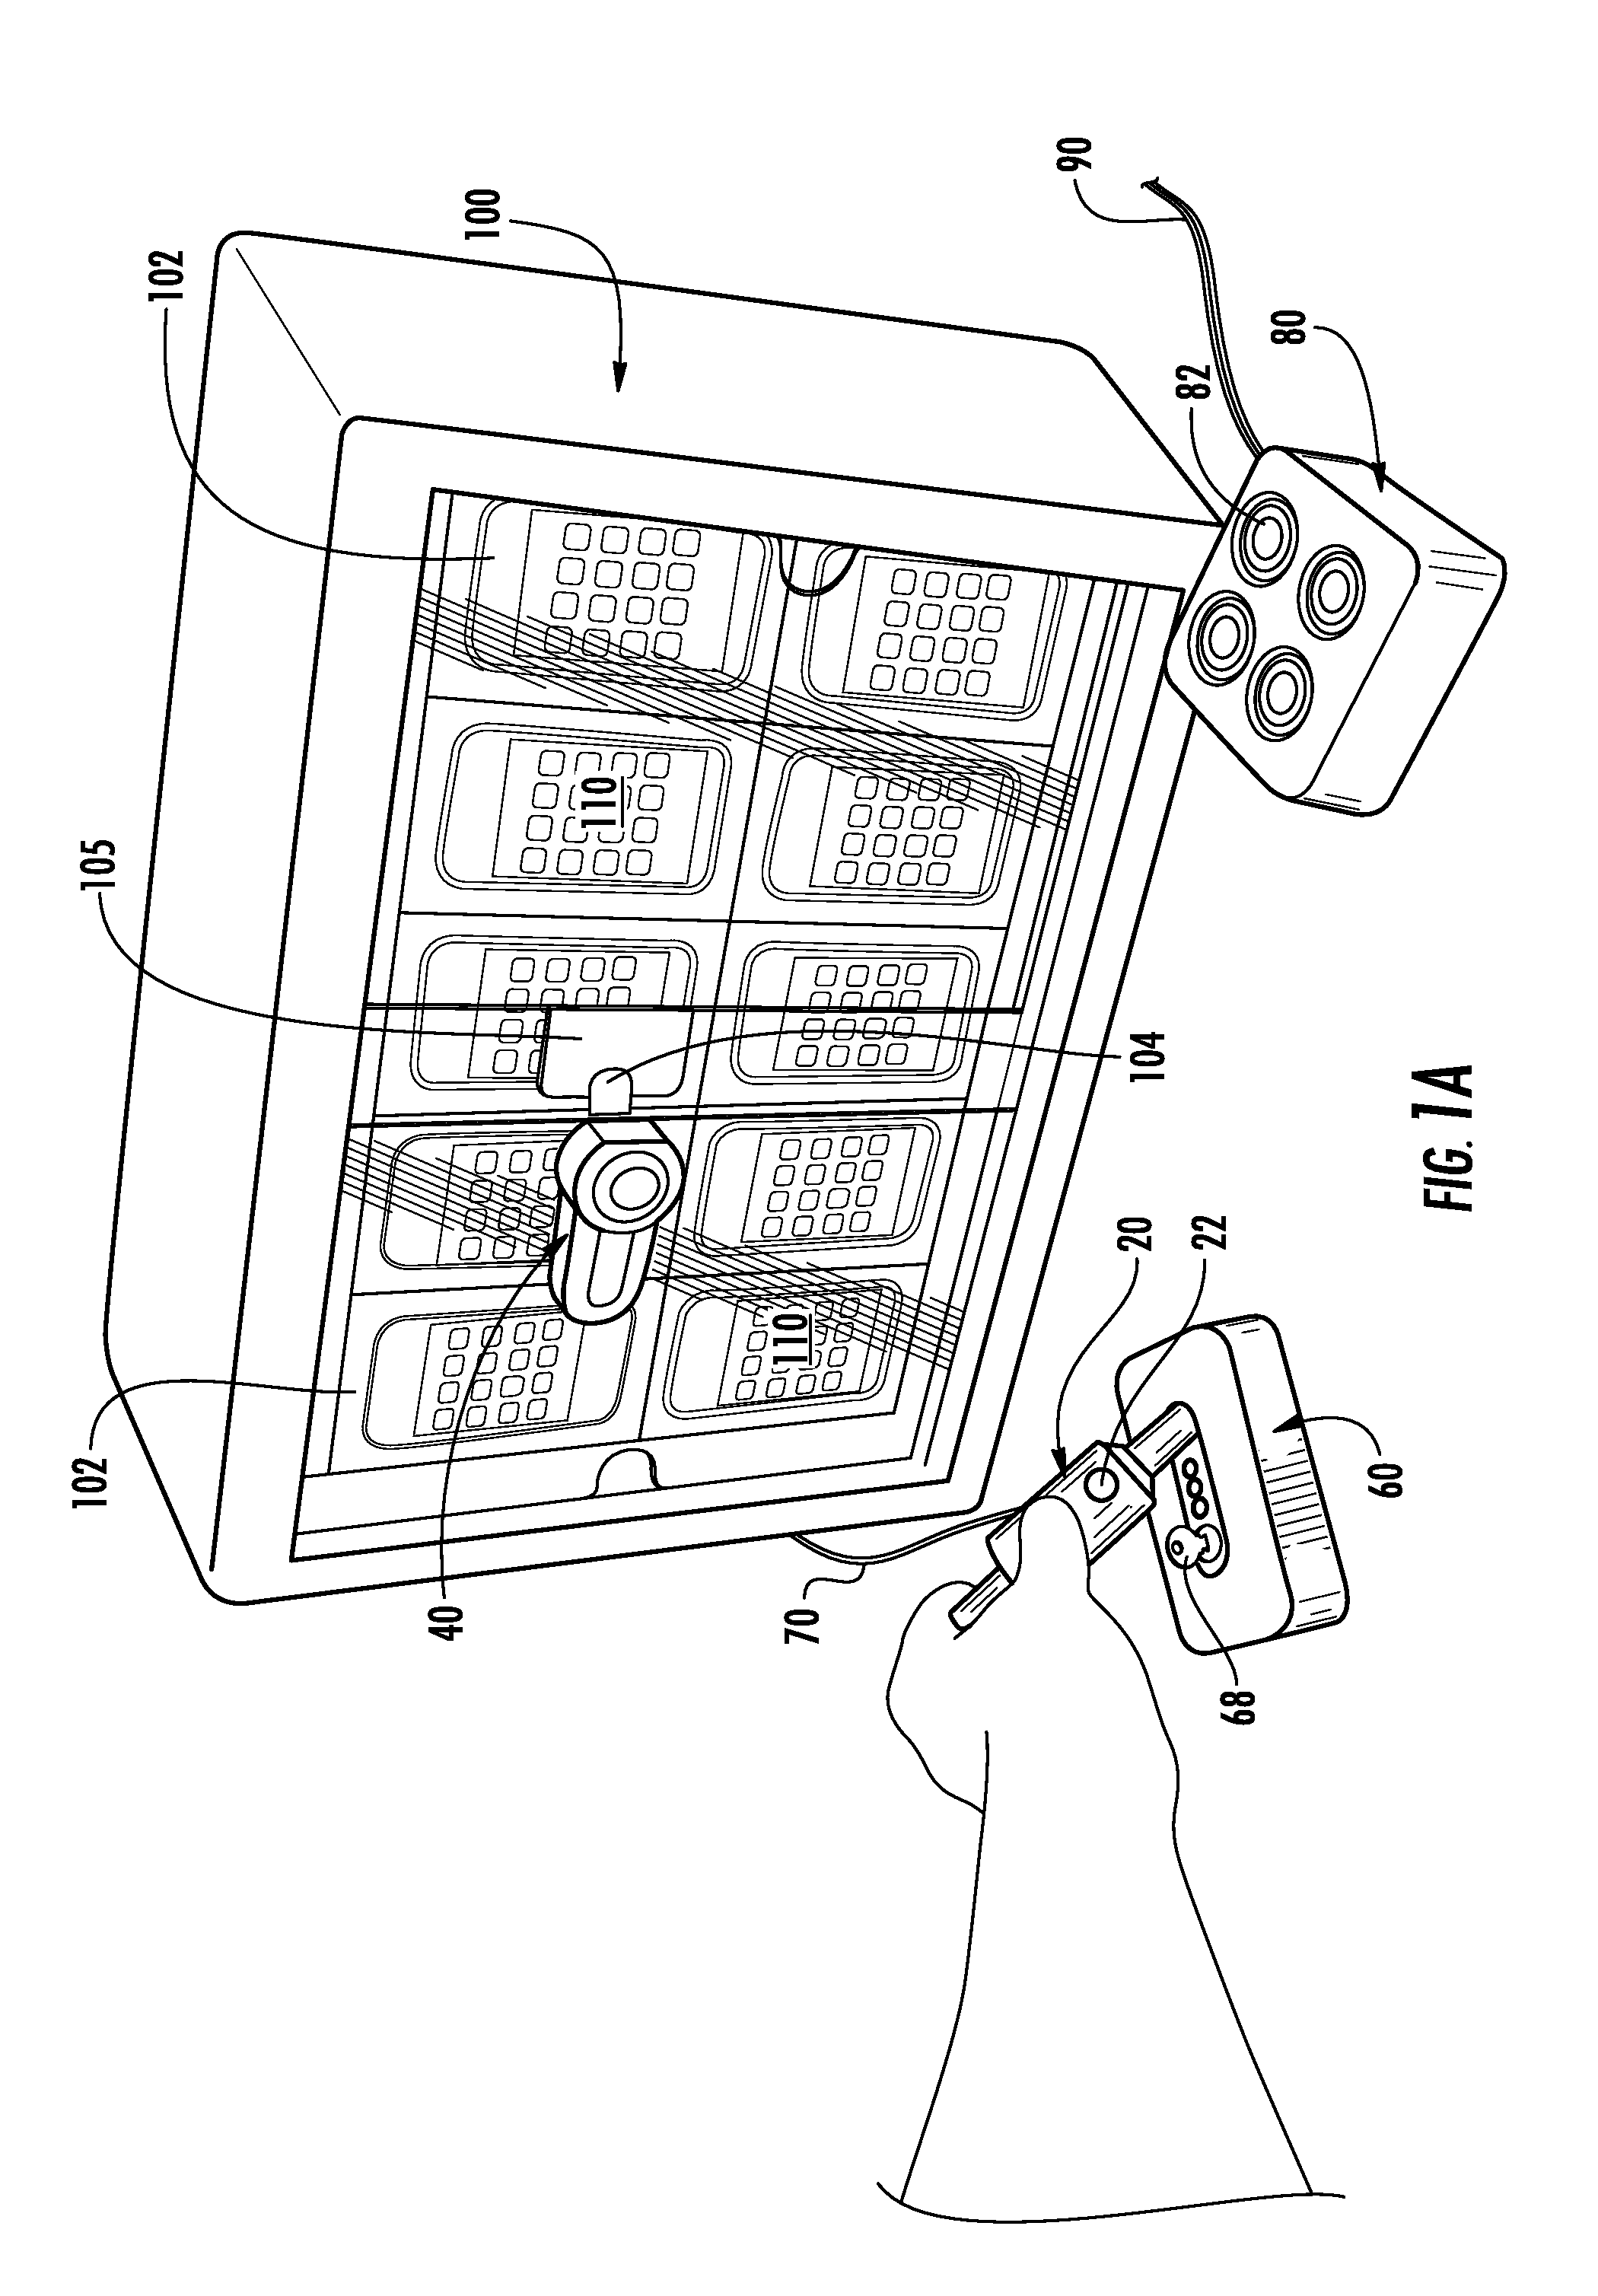 Electronic key for merchandise security device